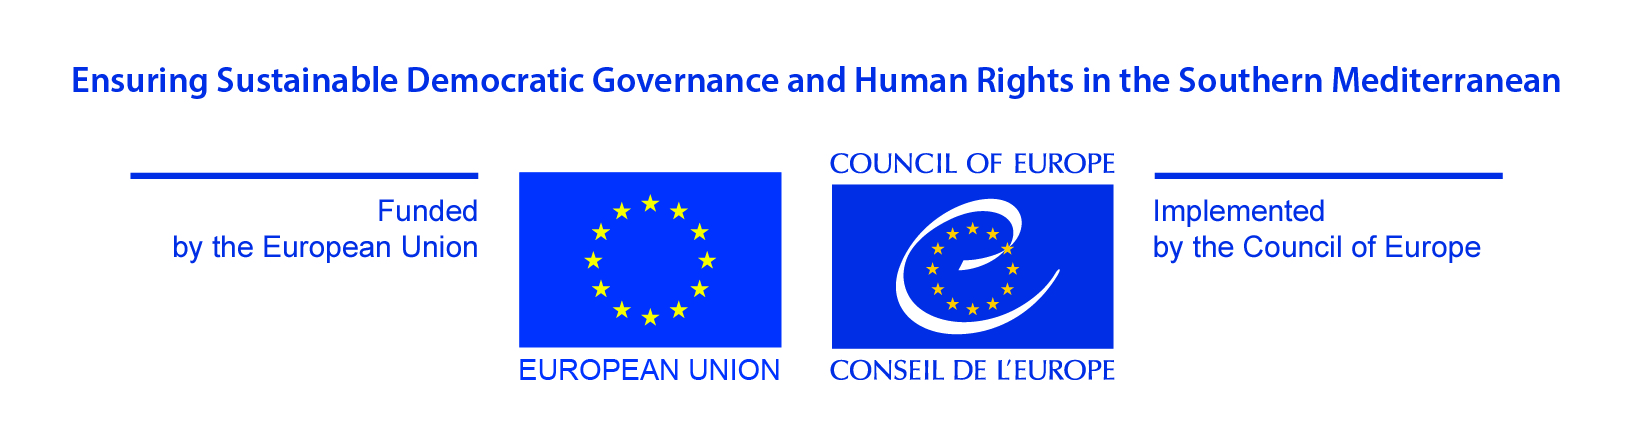 Ensuring Sustainable Democratic Governance and Human Rights in the Southern Mediterranean 